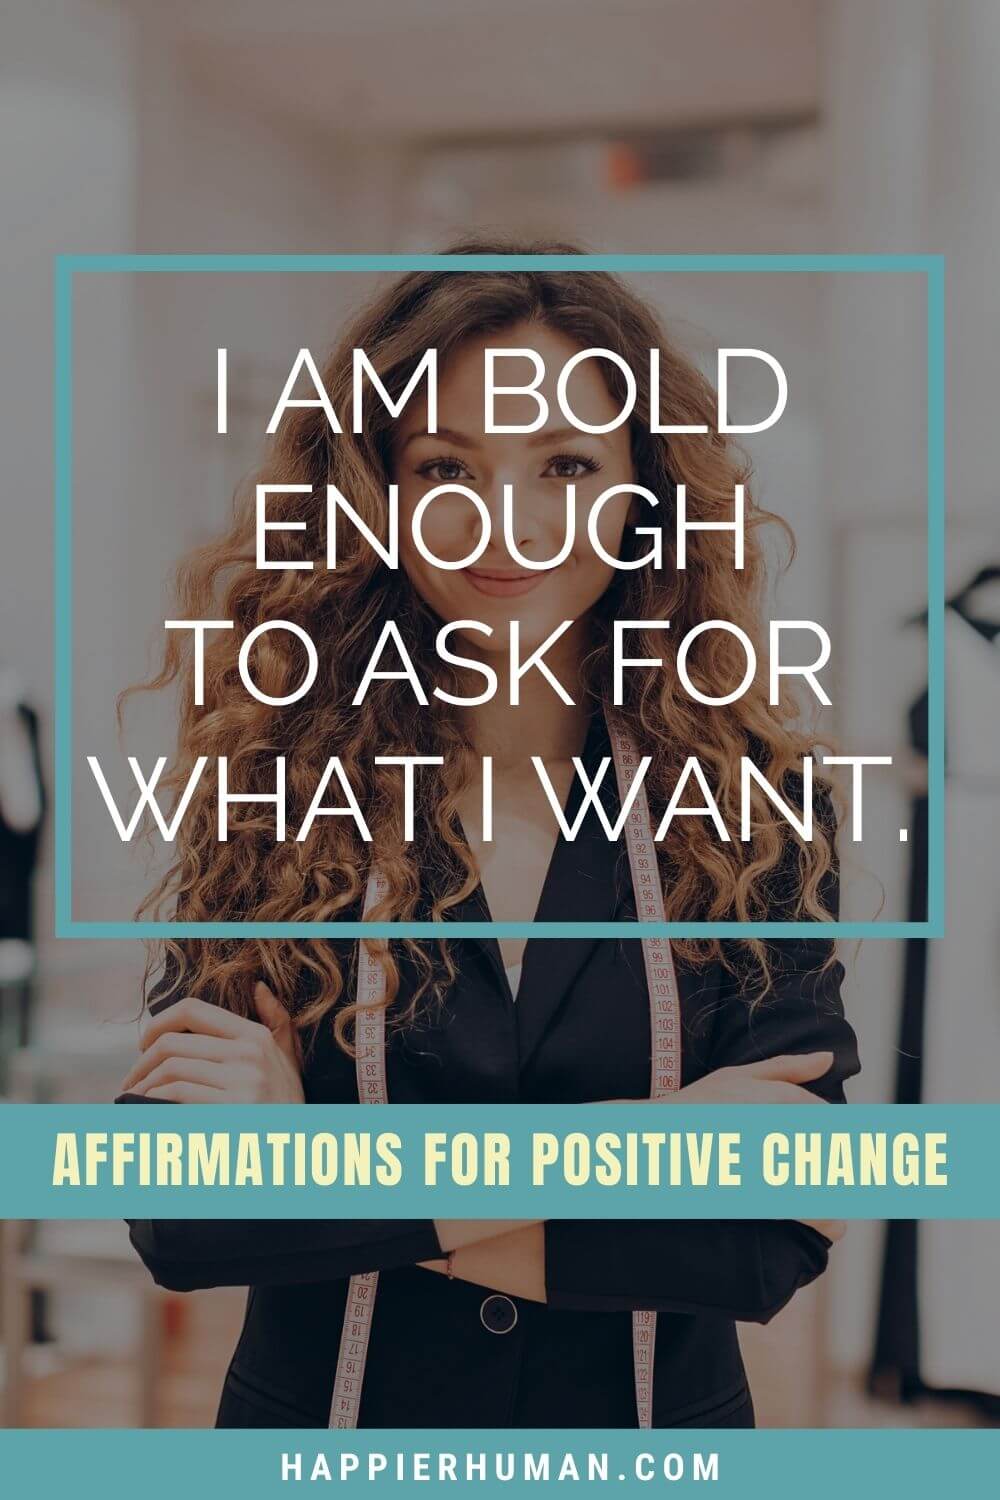 Affirmations for Change - I am bold enough to ask for what I want. | affirmations for changing habits | affirmations for physical change | affirmations for life direction